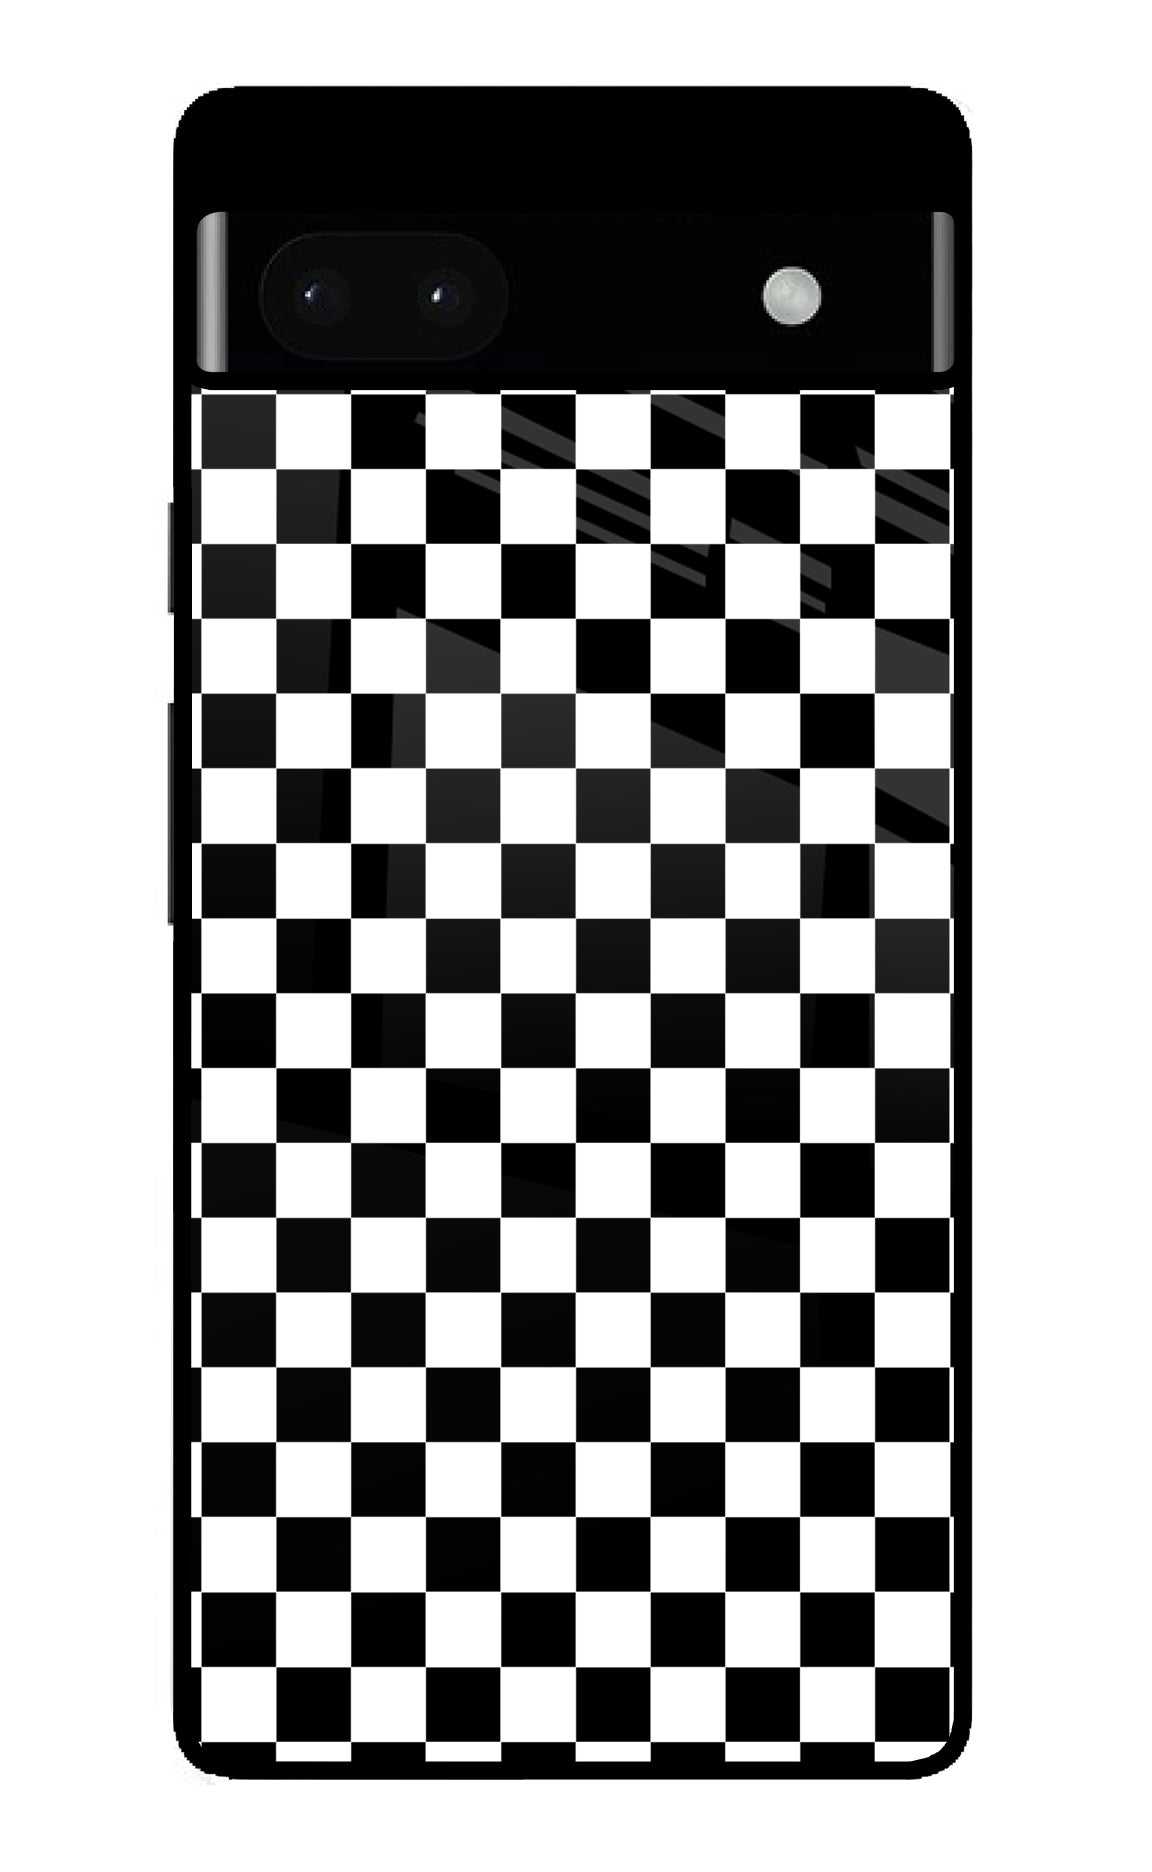 Chess Board Google Pixel 6A Back Cover